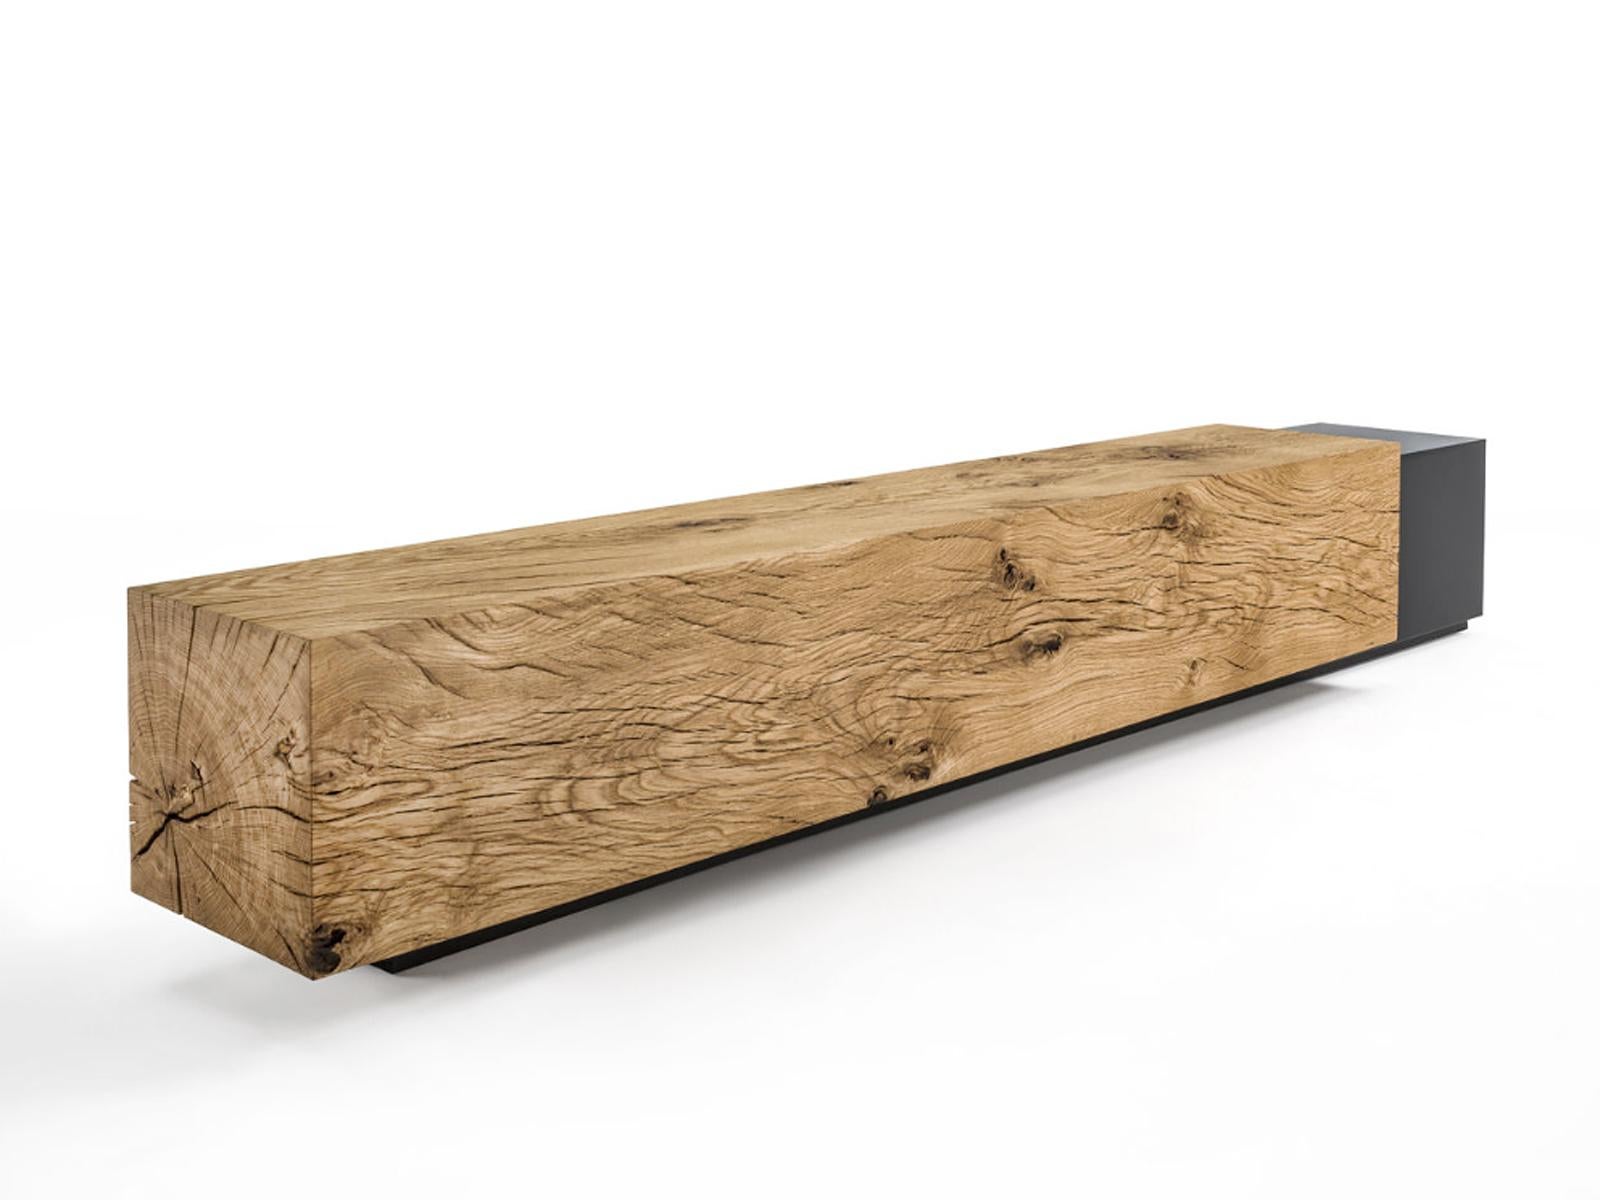 Bench cedar and iron in solid natural aromatic
cedar wood and with lacquered iron.
Made in on block of cedar wood. Treated with
natural pine extracts wax. Elegant and original 
piece. Also available in solid burnt cedar wood,
on request.
Solid cedar